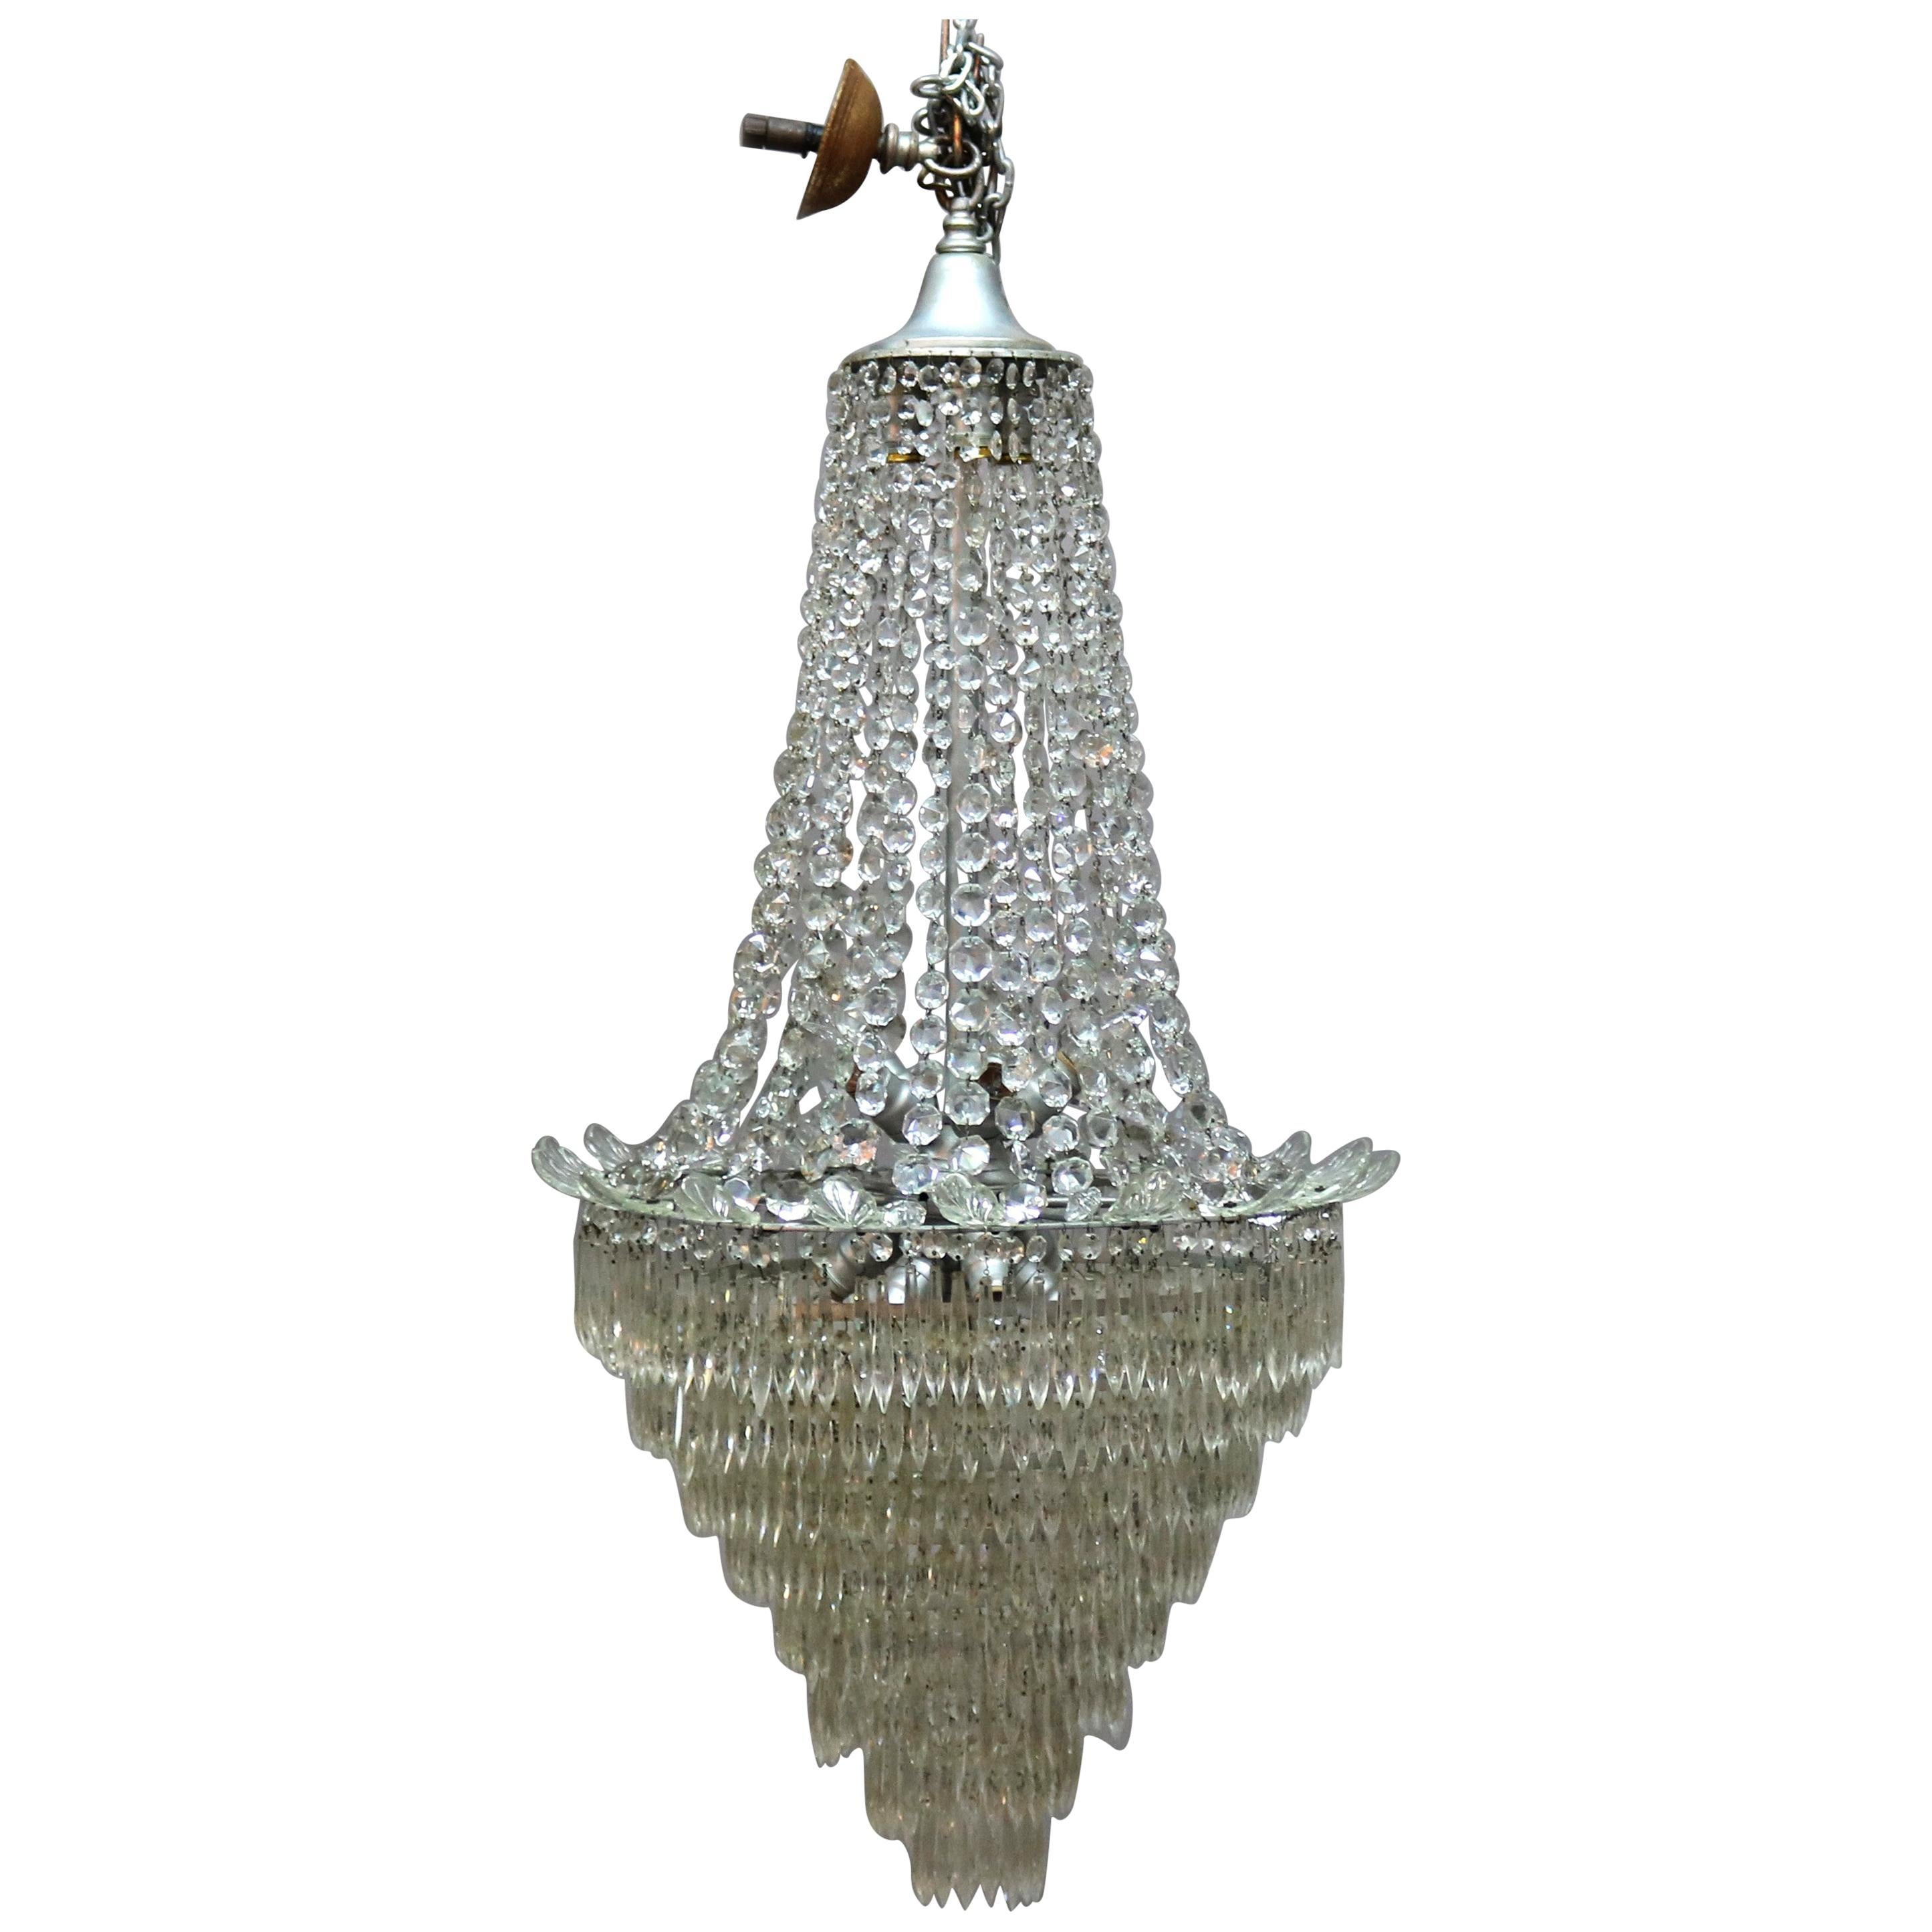 Vintage French Draped Crystal Tiered Wedding Cake 15-Light Chandelier For Sale